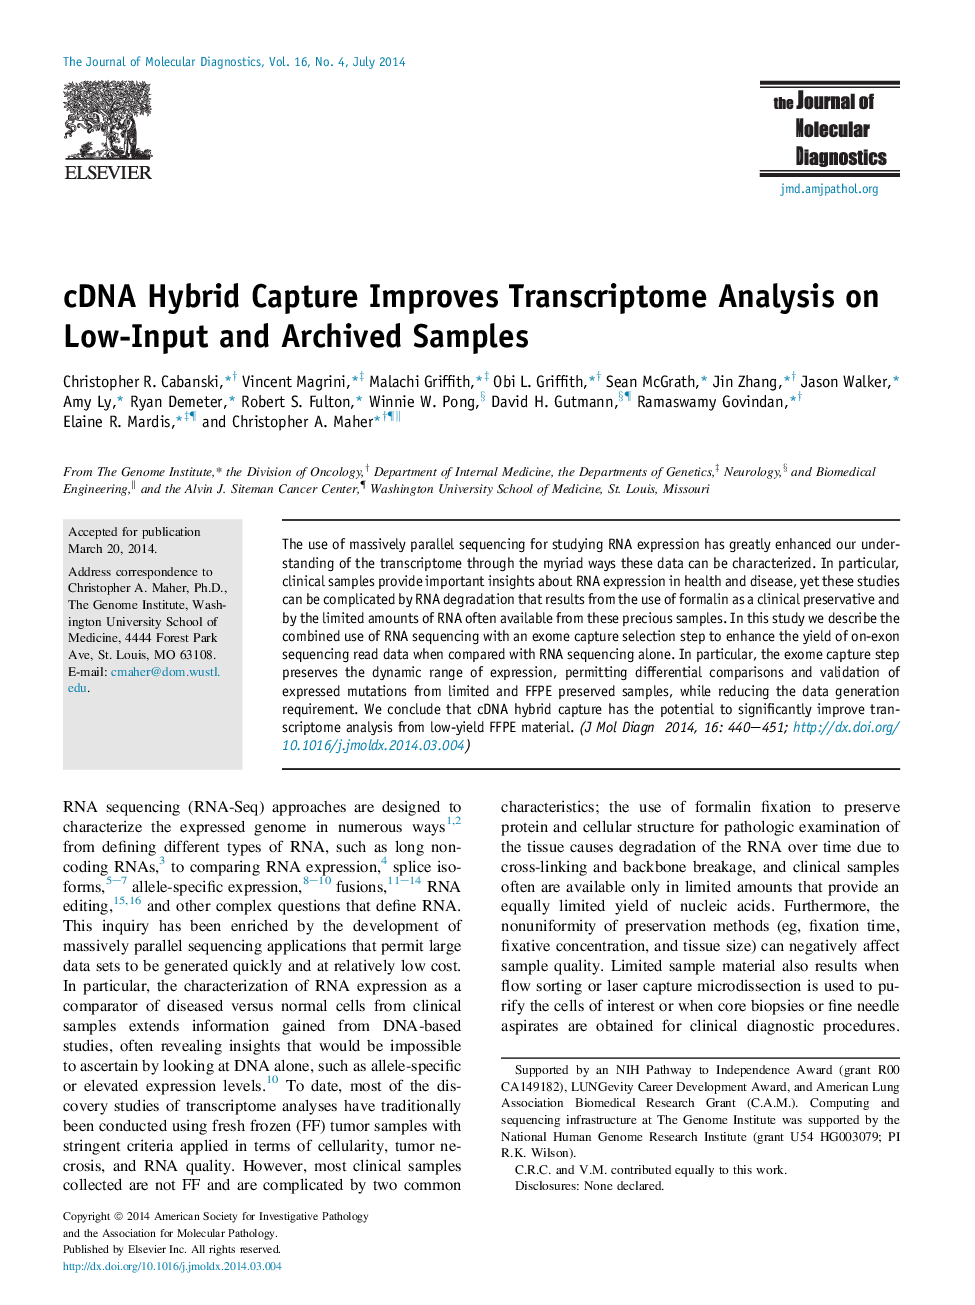 Regular articlecDNA Hybrid Capture Improves Transcriptome Analysis on Low-Input and Archived Samples